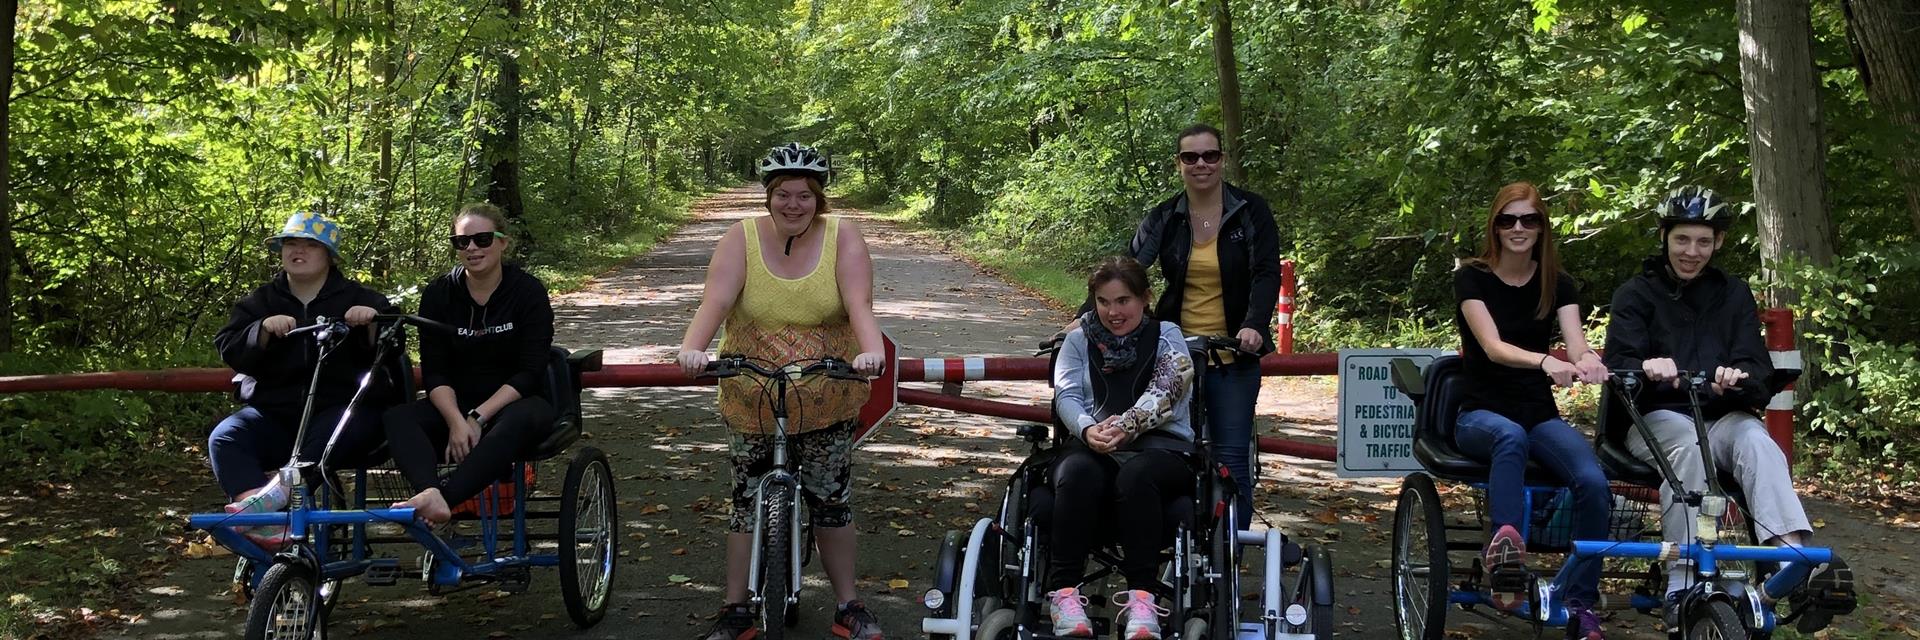 Group of people on different styles of bikes and wheelchairs exploring a path.